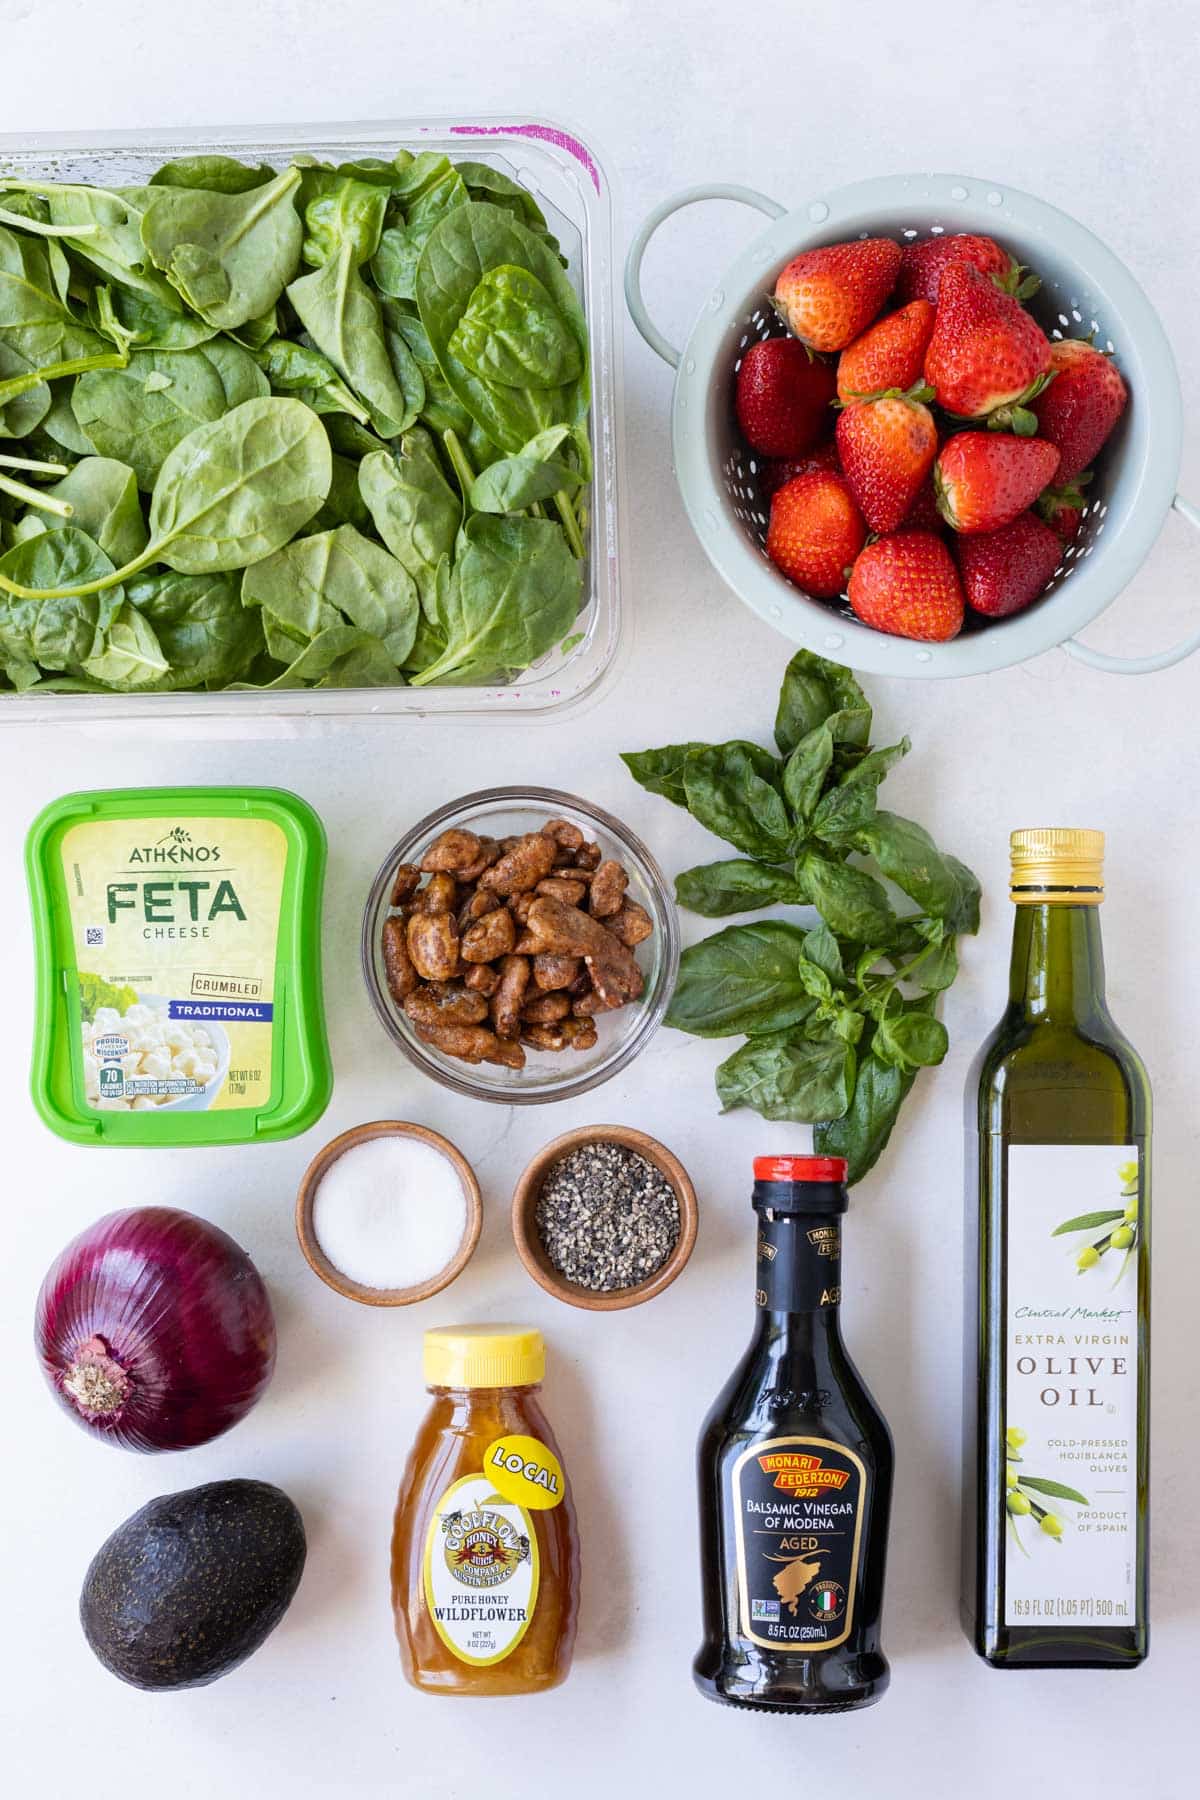 Spinach, strawberries, feta, candied pegans, basil, red onion, avocado, honey, balsamic vinegar, olive oil and salt and pepper are arranged as ingredients for a salad.